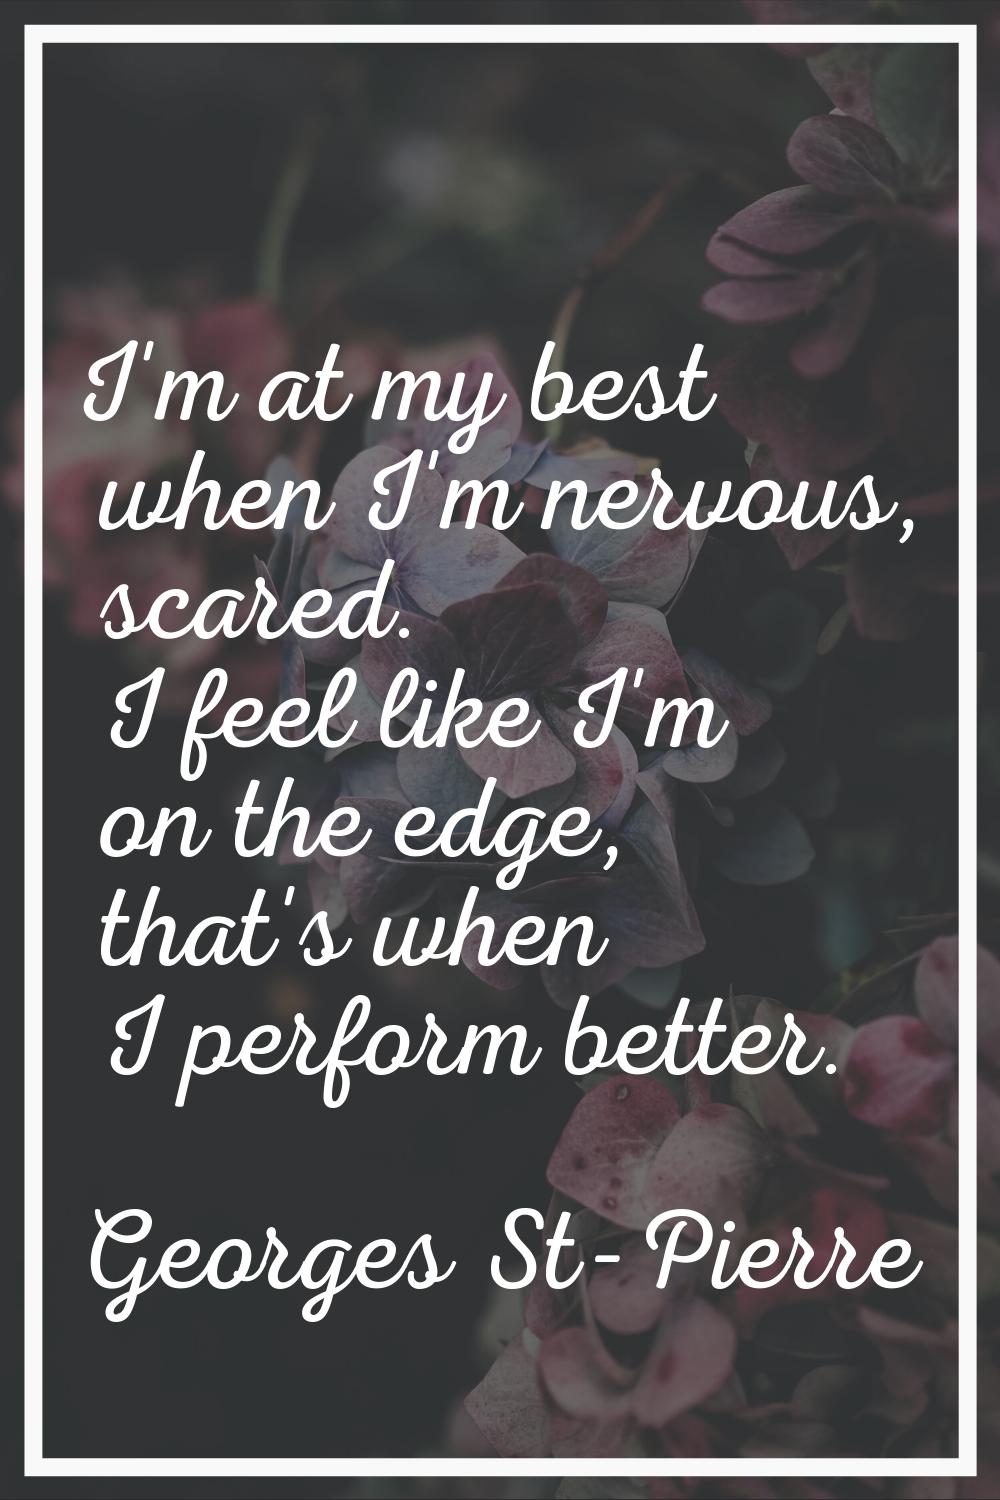 I'm at my best when I'm nervous, scared. I feel like I'm on the edge, that's when I perform better.